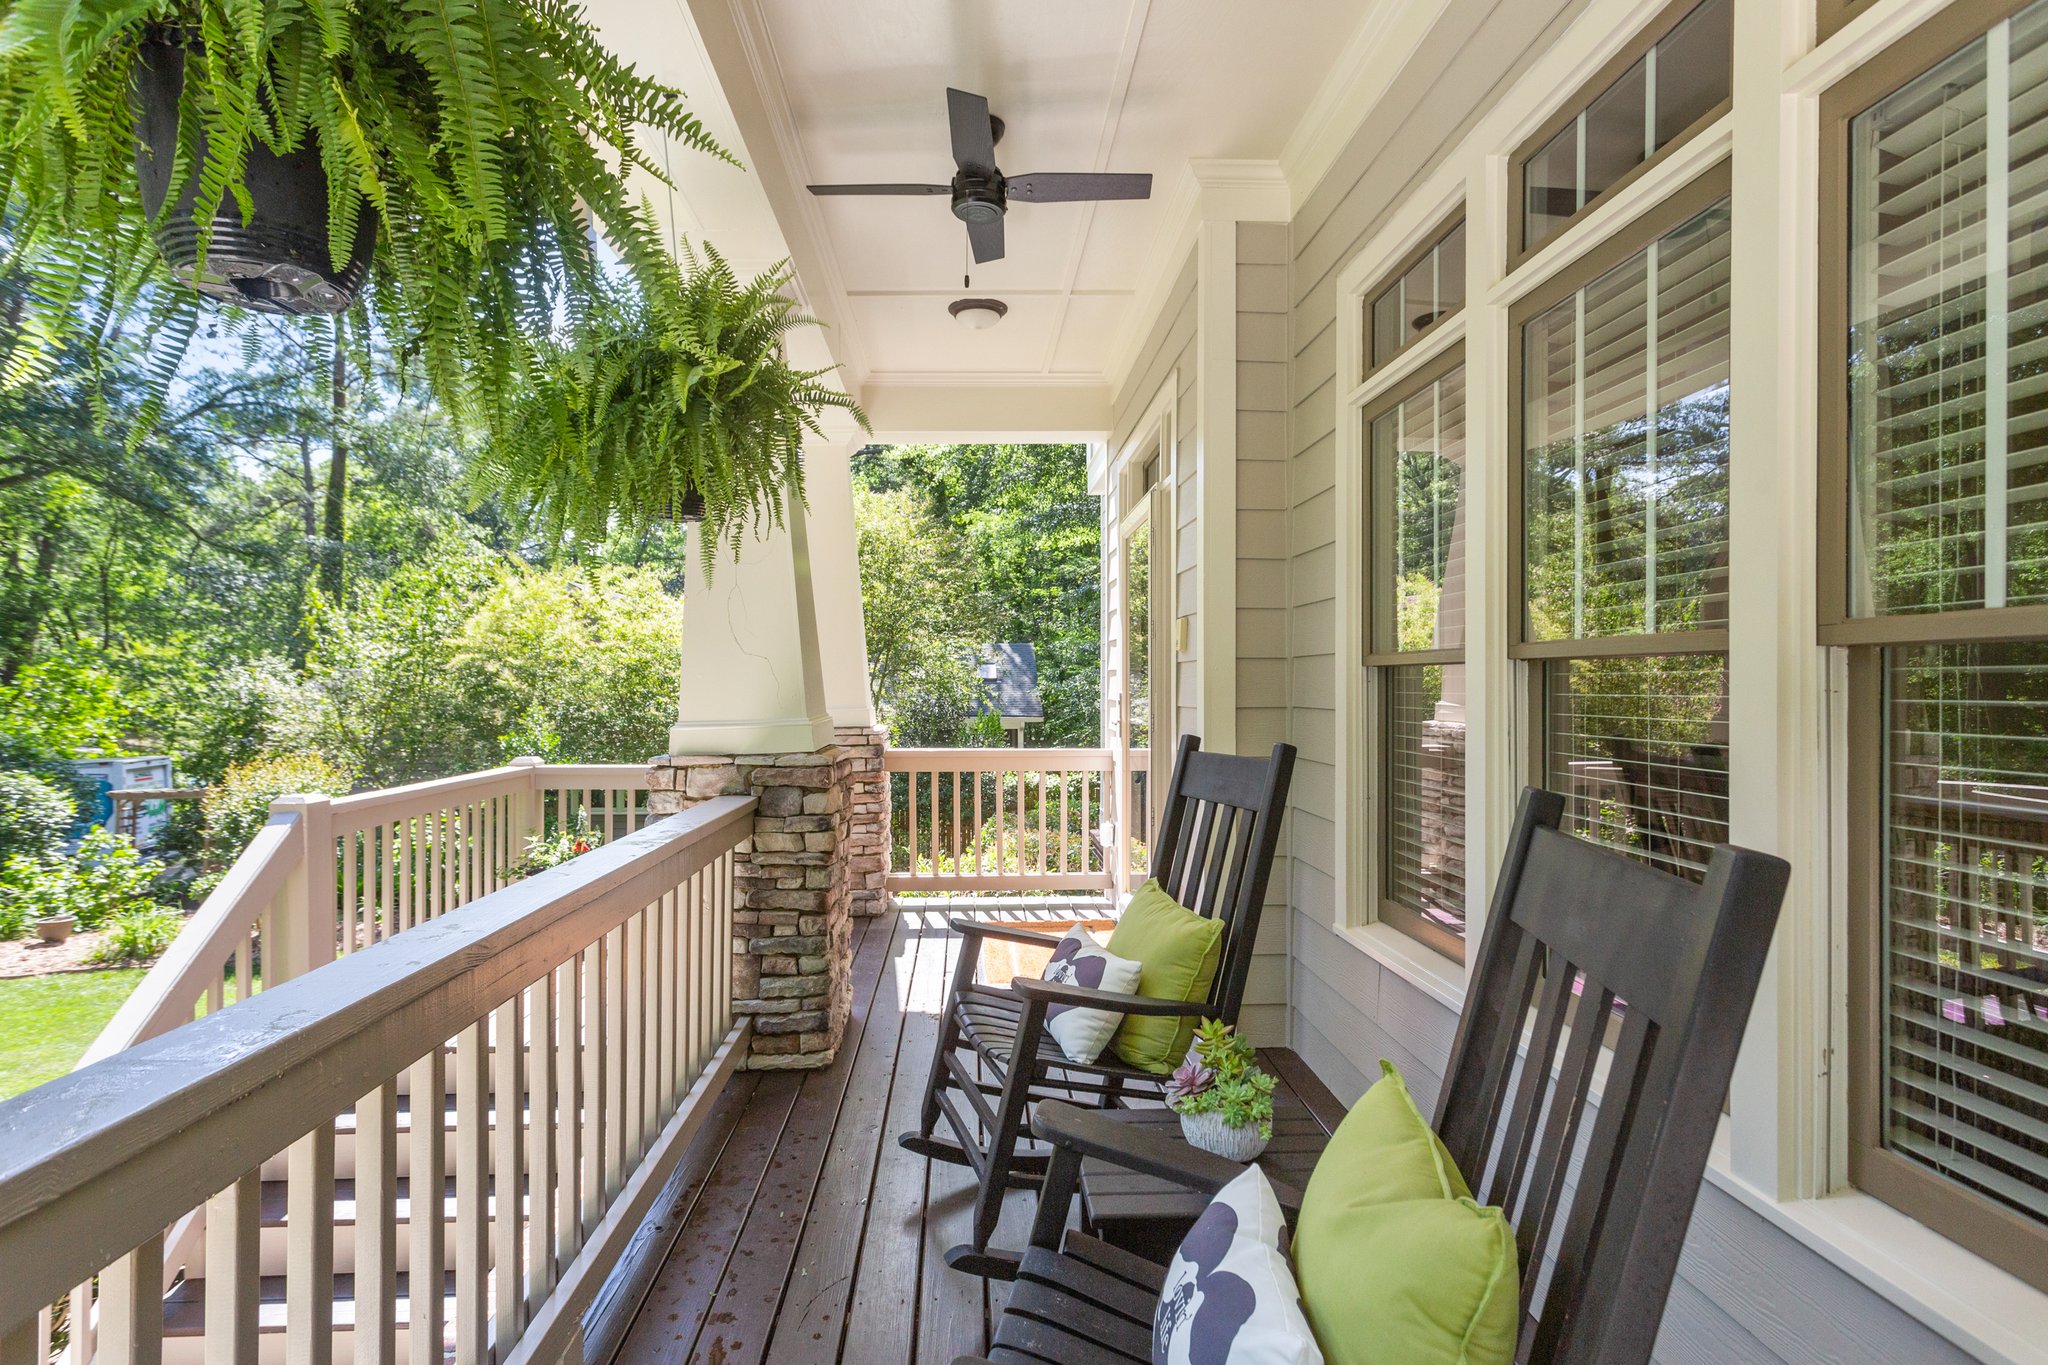 The charming front porch